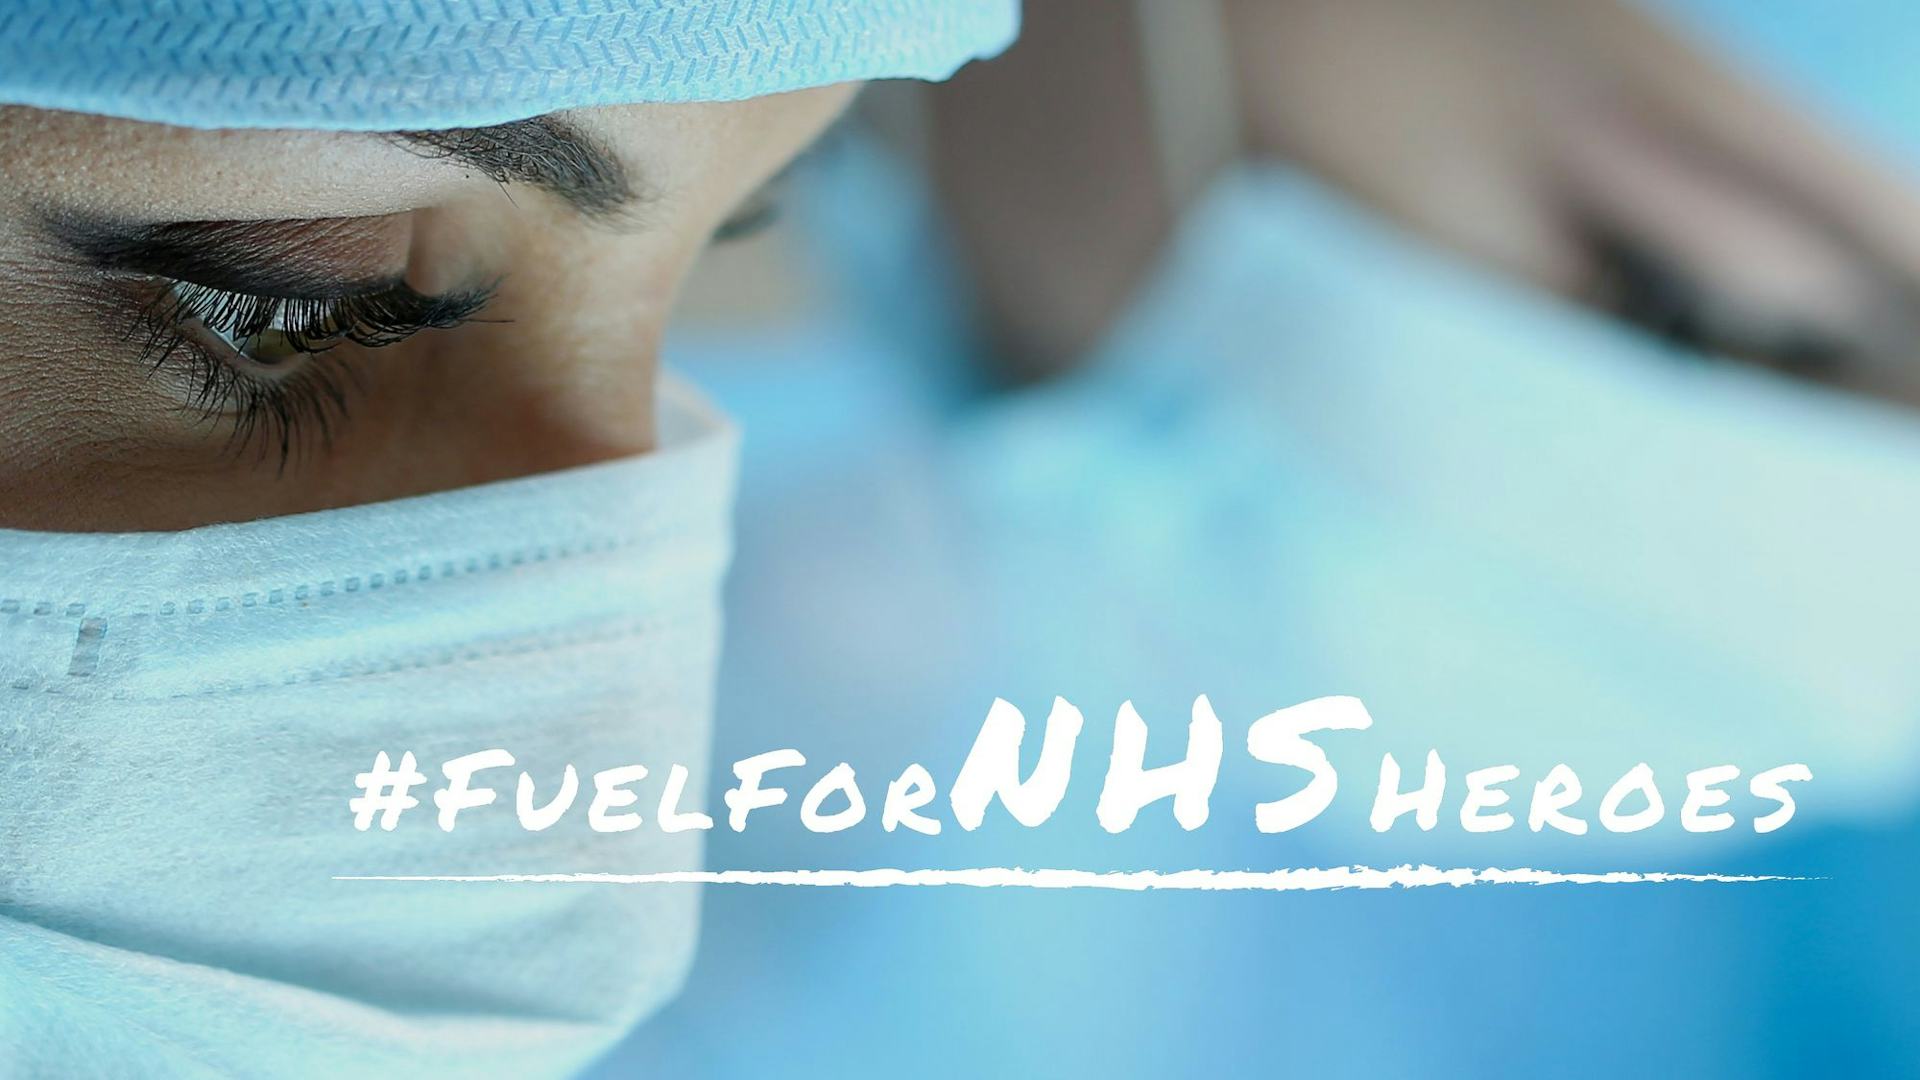 TheConduit has created the #FuelforNHSHeroes campaign to feed frontline NHS staff